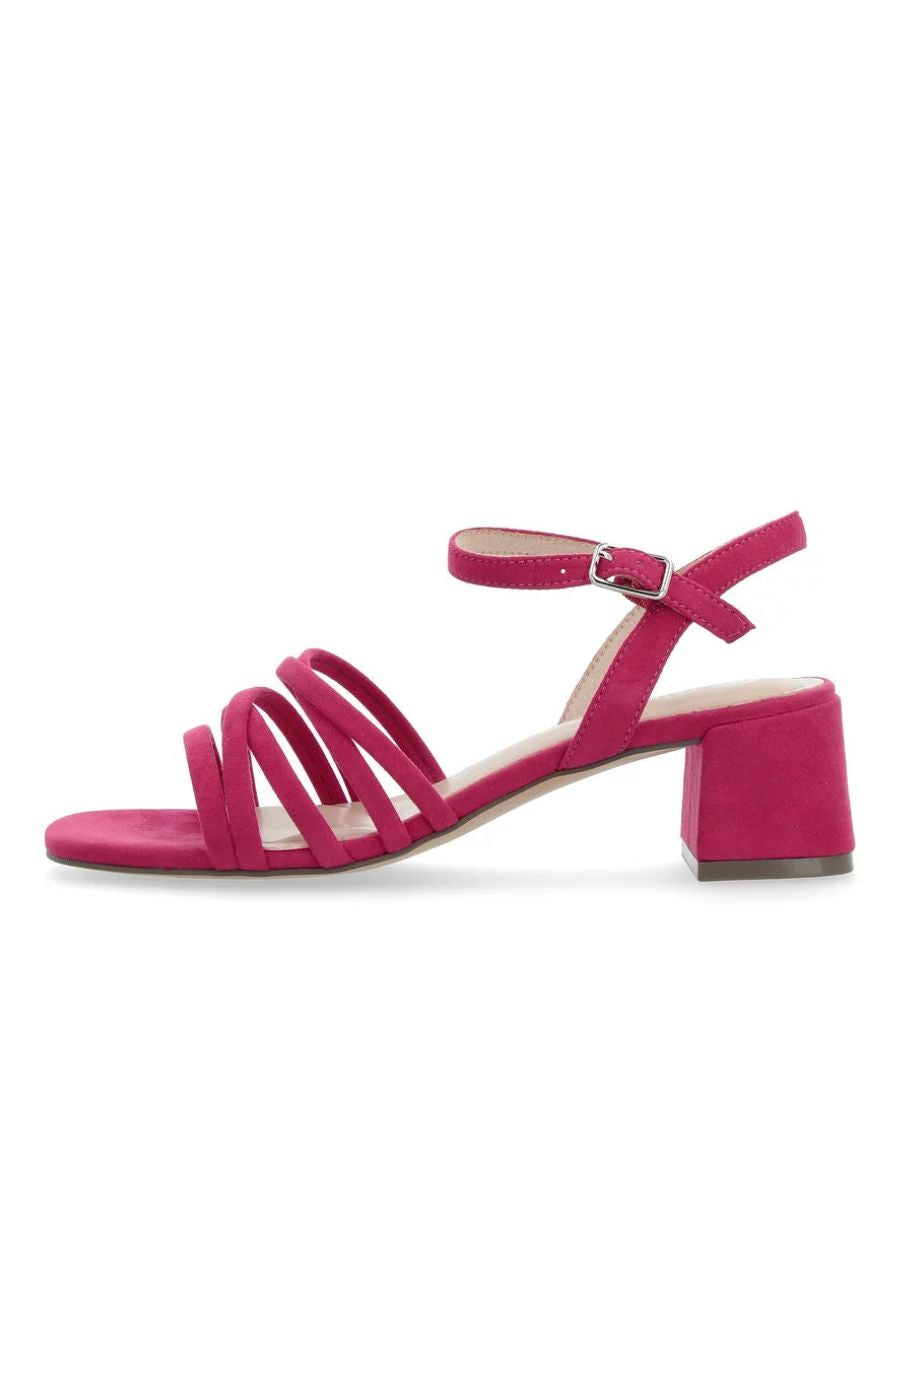 Remonte Strappy Sandal in Pink